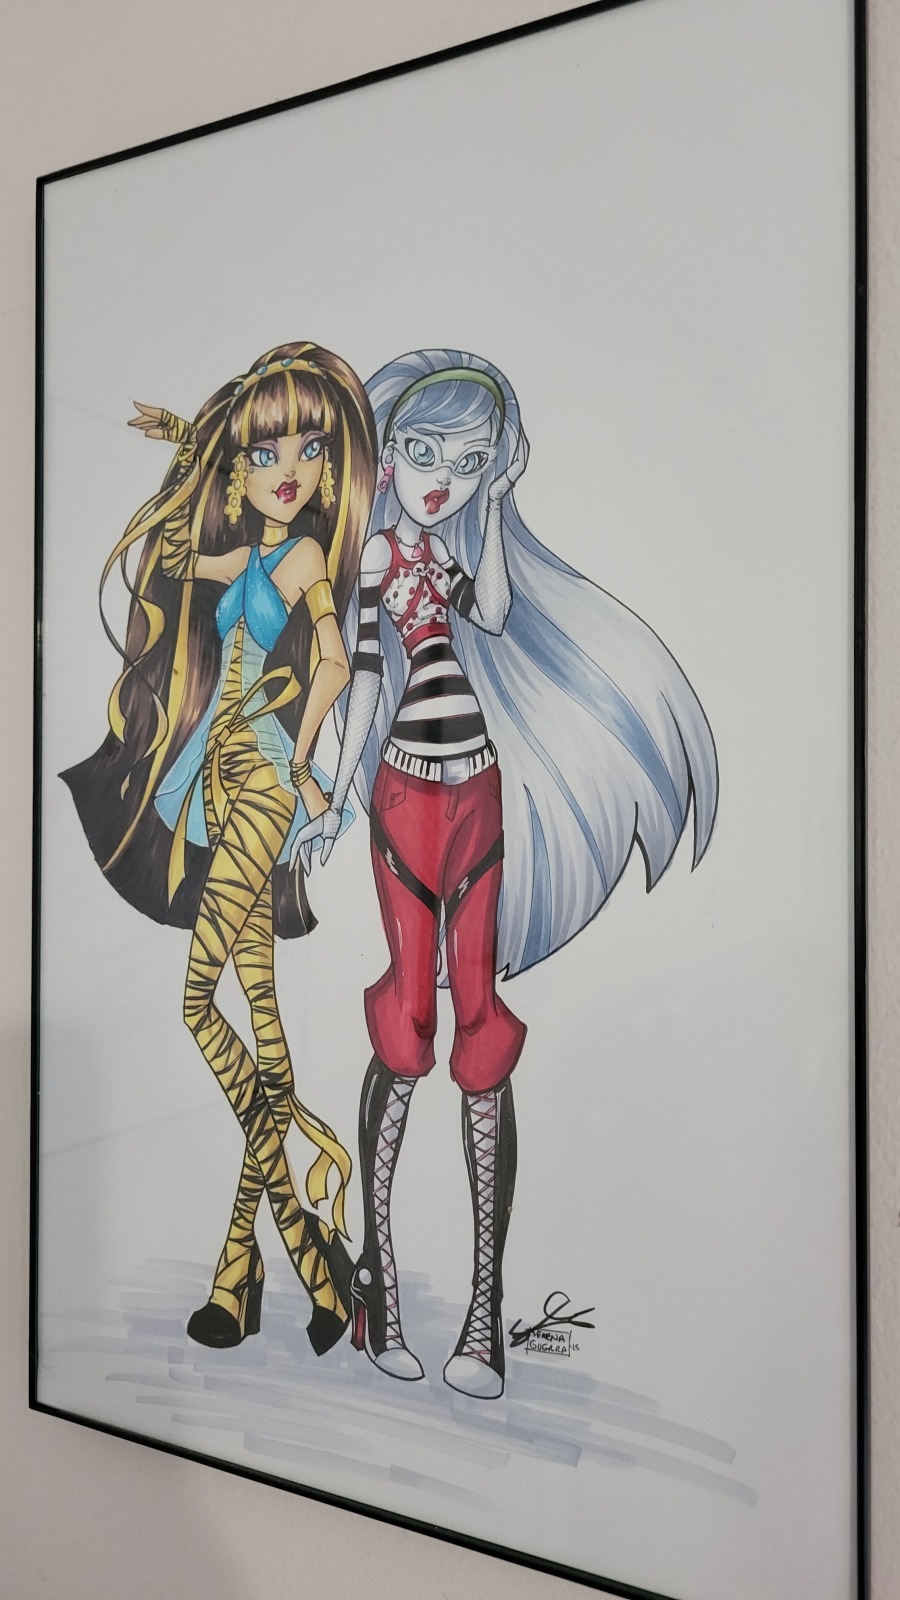 Cleo de Nile and Ghoulia Yelps (Monster High) by Serena Guerra